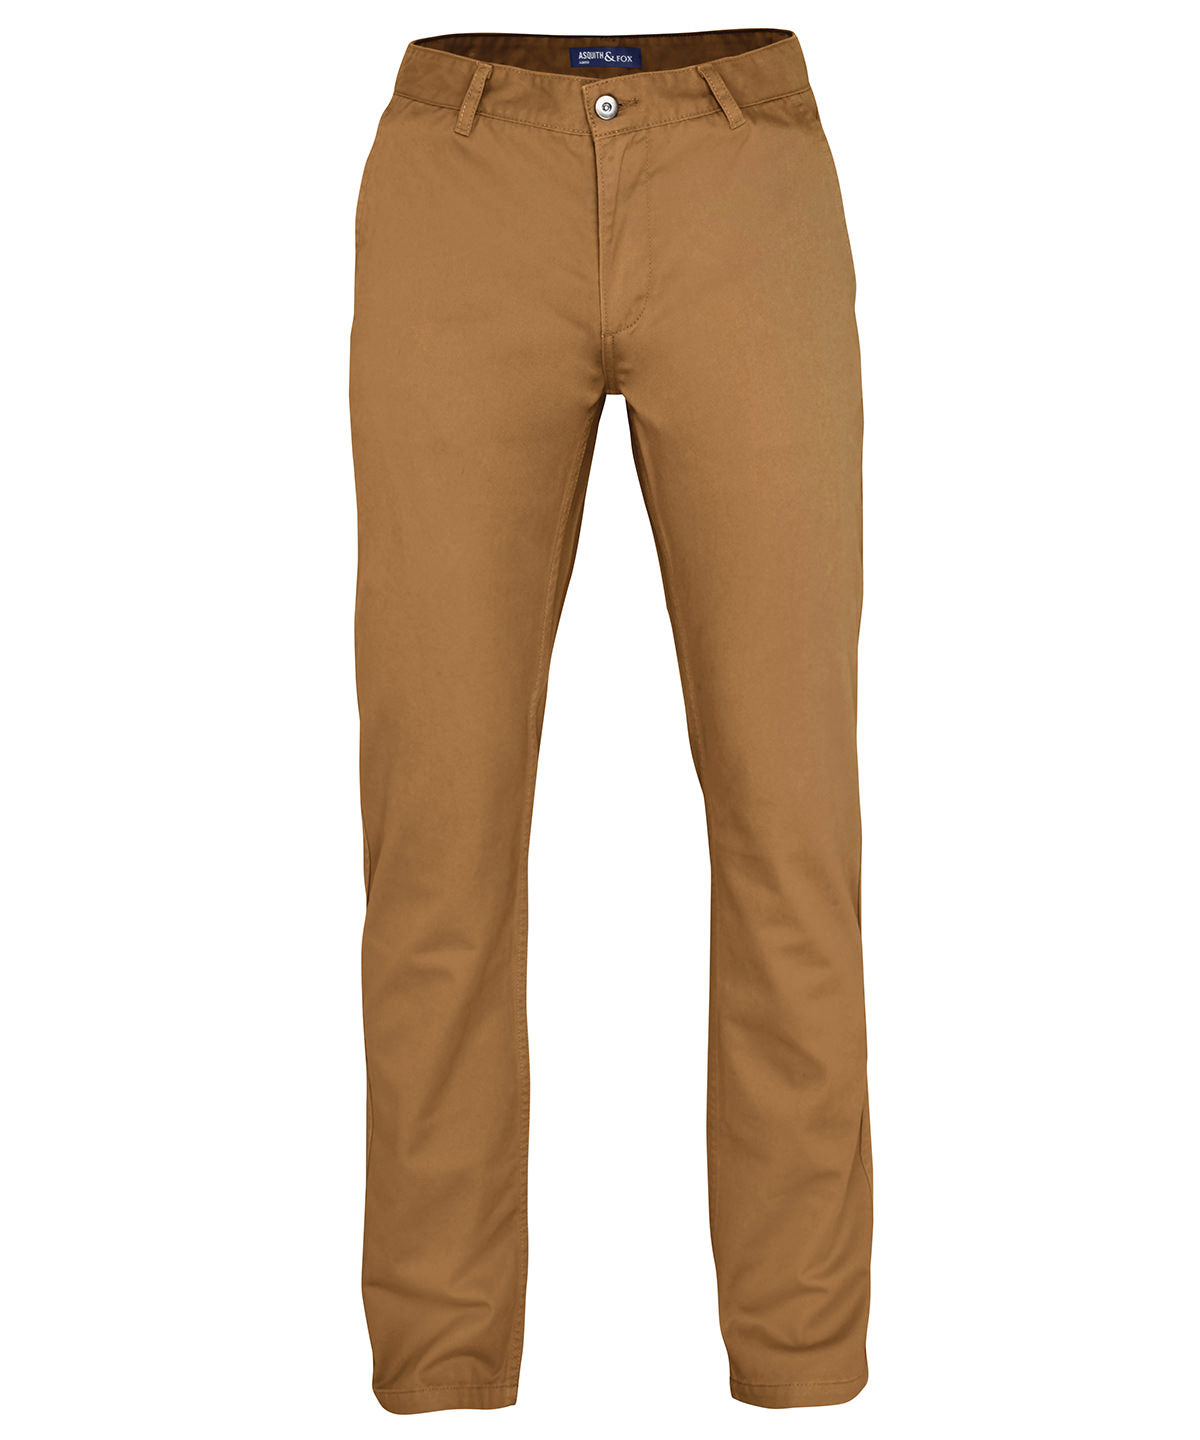 Personalised Trousers - Natural Asquith & Fox Men's chinos